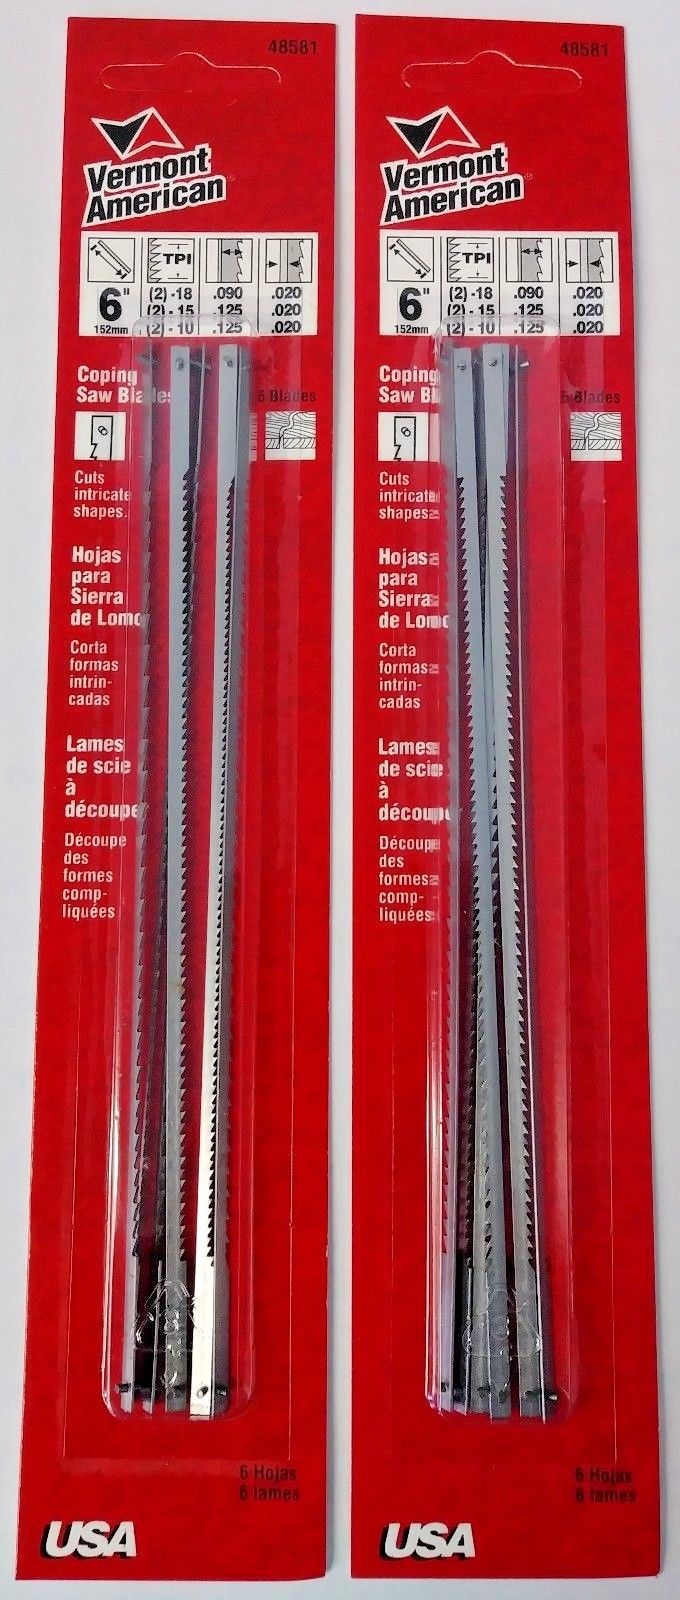 Vermont American 48581 6-1/2" Assorted Teeth Coping Saw Blades 2 Packs of 6 USA